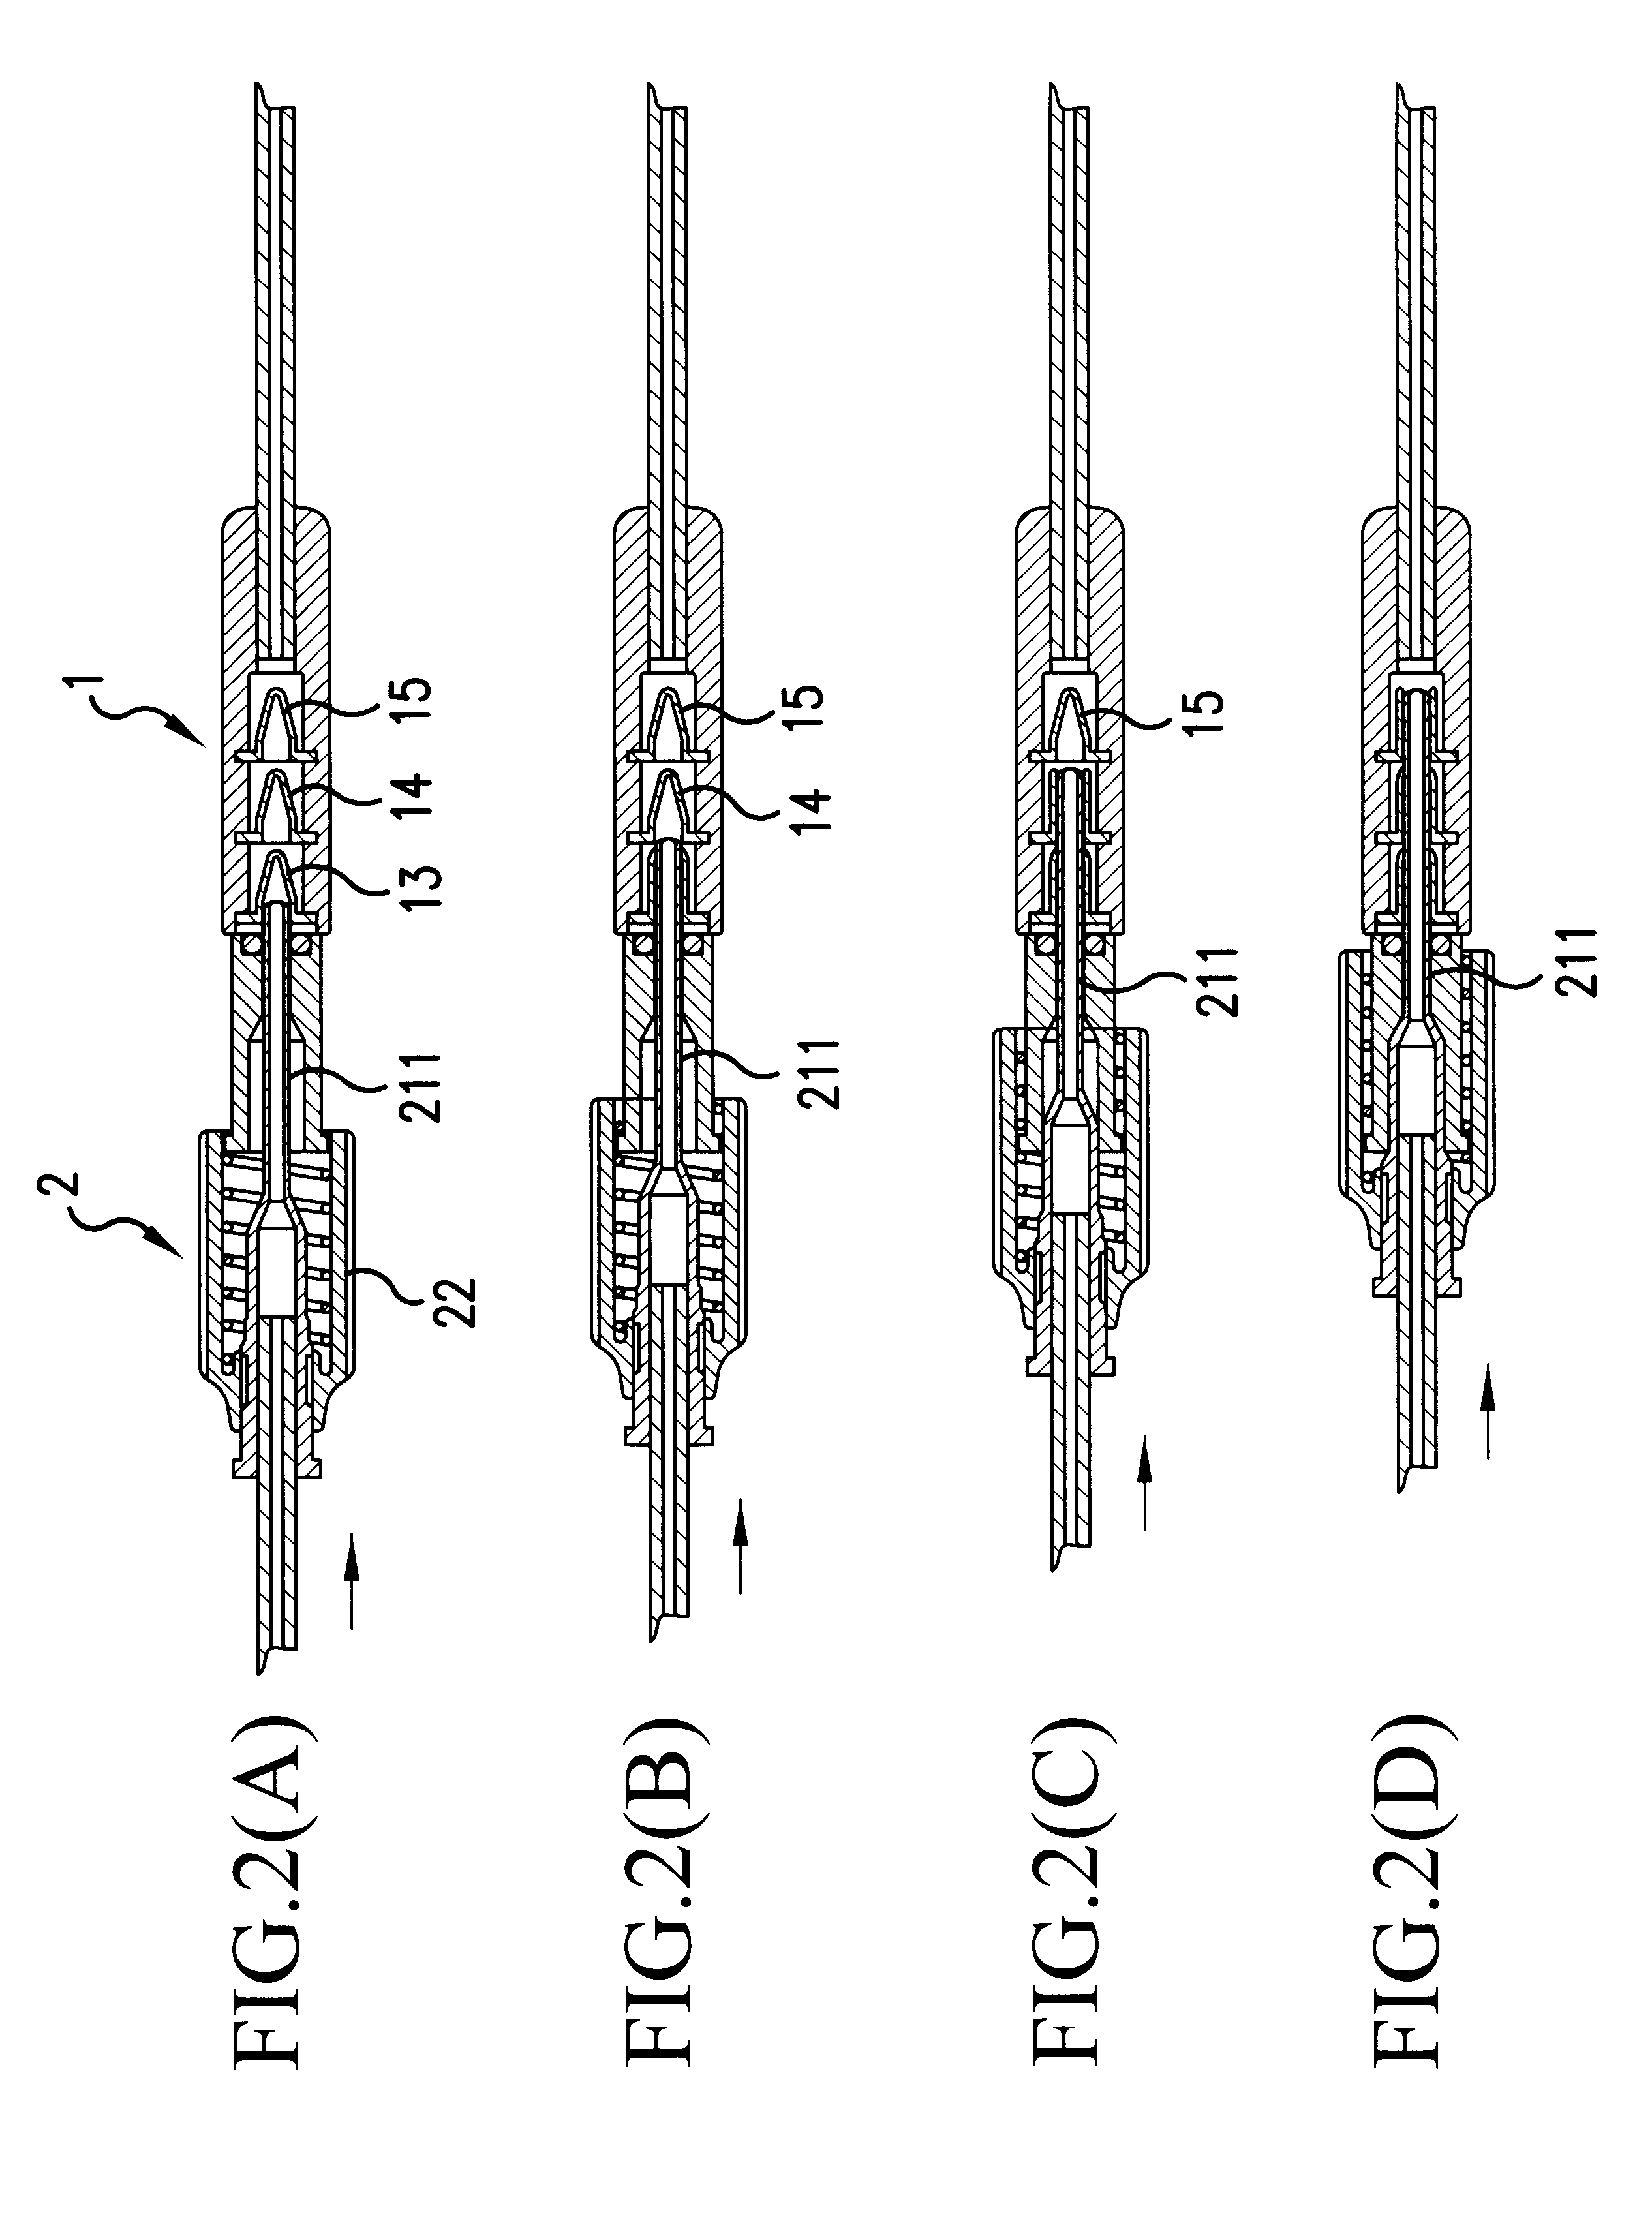 Infusion rate adjusting device for drug solution injector